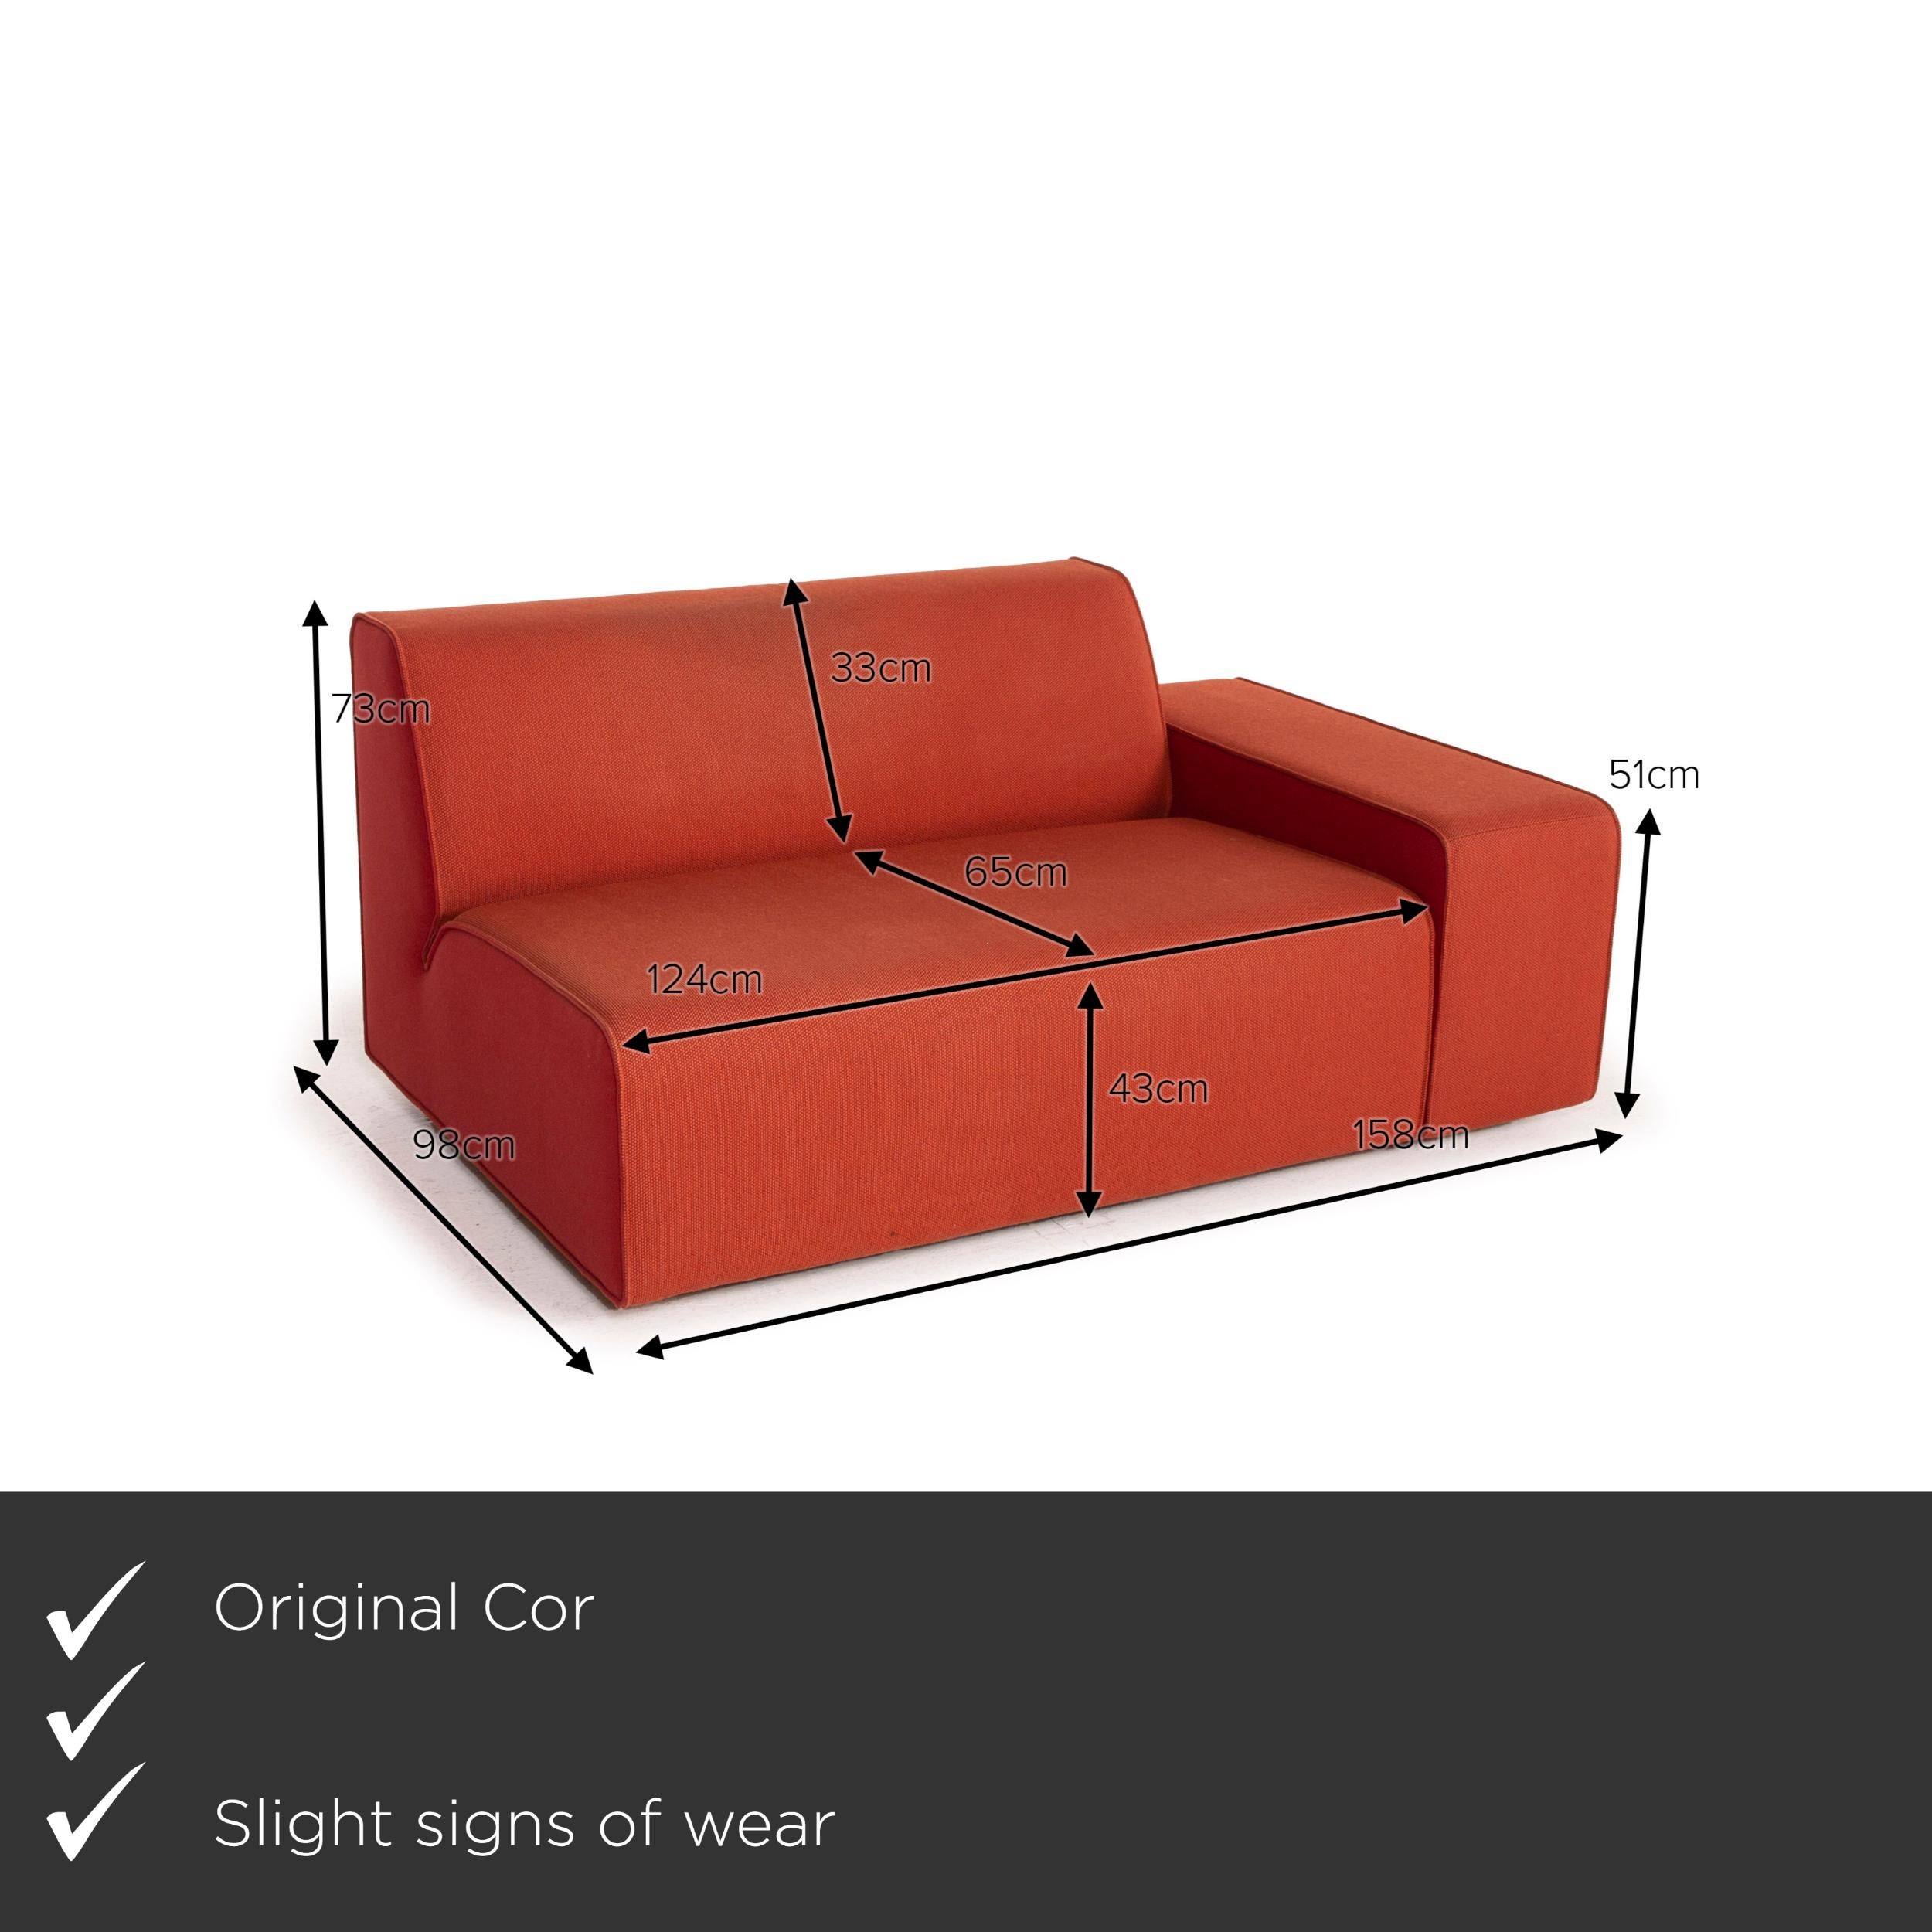 We present to you a Cor Kelp Fabric Sofa Orange Two Seater Modular.
 
 

 Product measurements in centimeters:
 

Depth 98
Width 158
Height 73
Seat height 42
Rest height 51
Seat depth 65
Seat width 124
Back height 33.